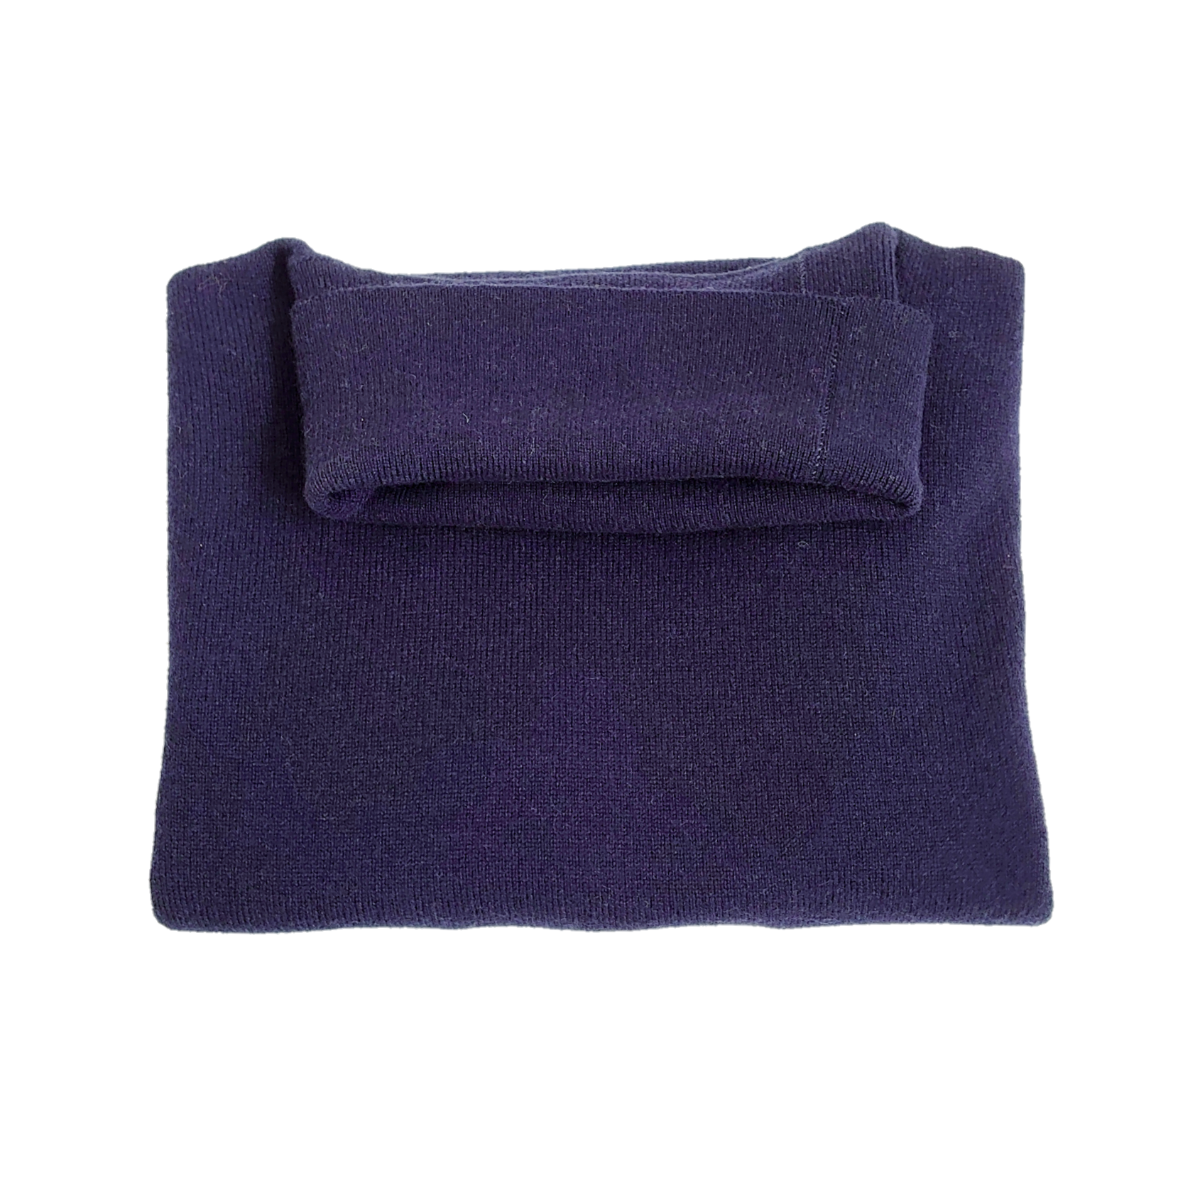 Ladies Classic Fit Roll Neck 100% Pure Cashmere Jumper - Navy Blue - XS